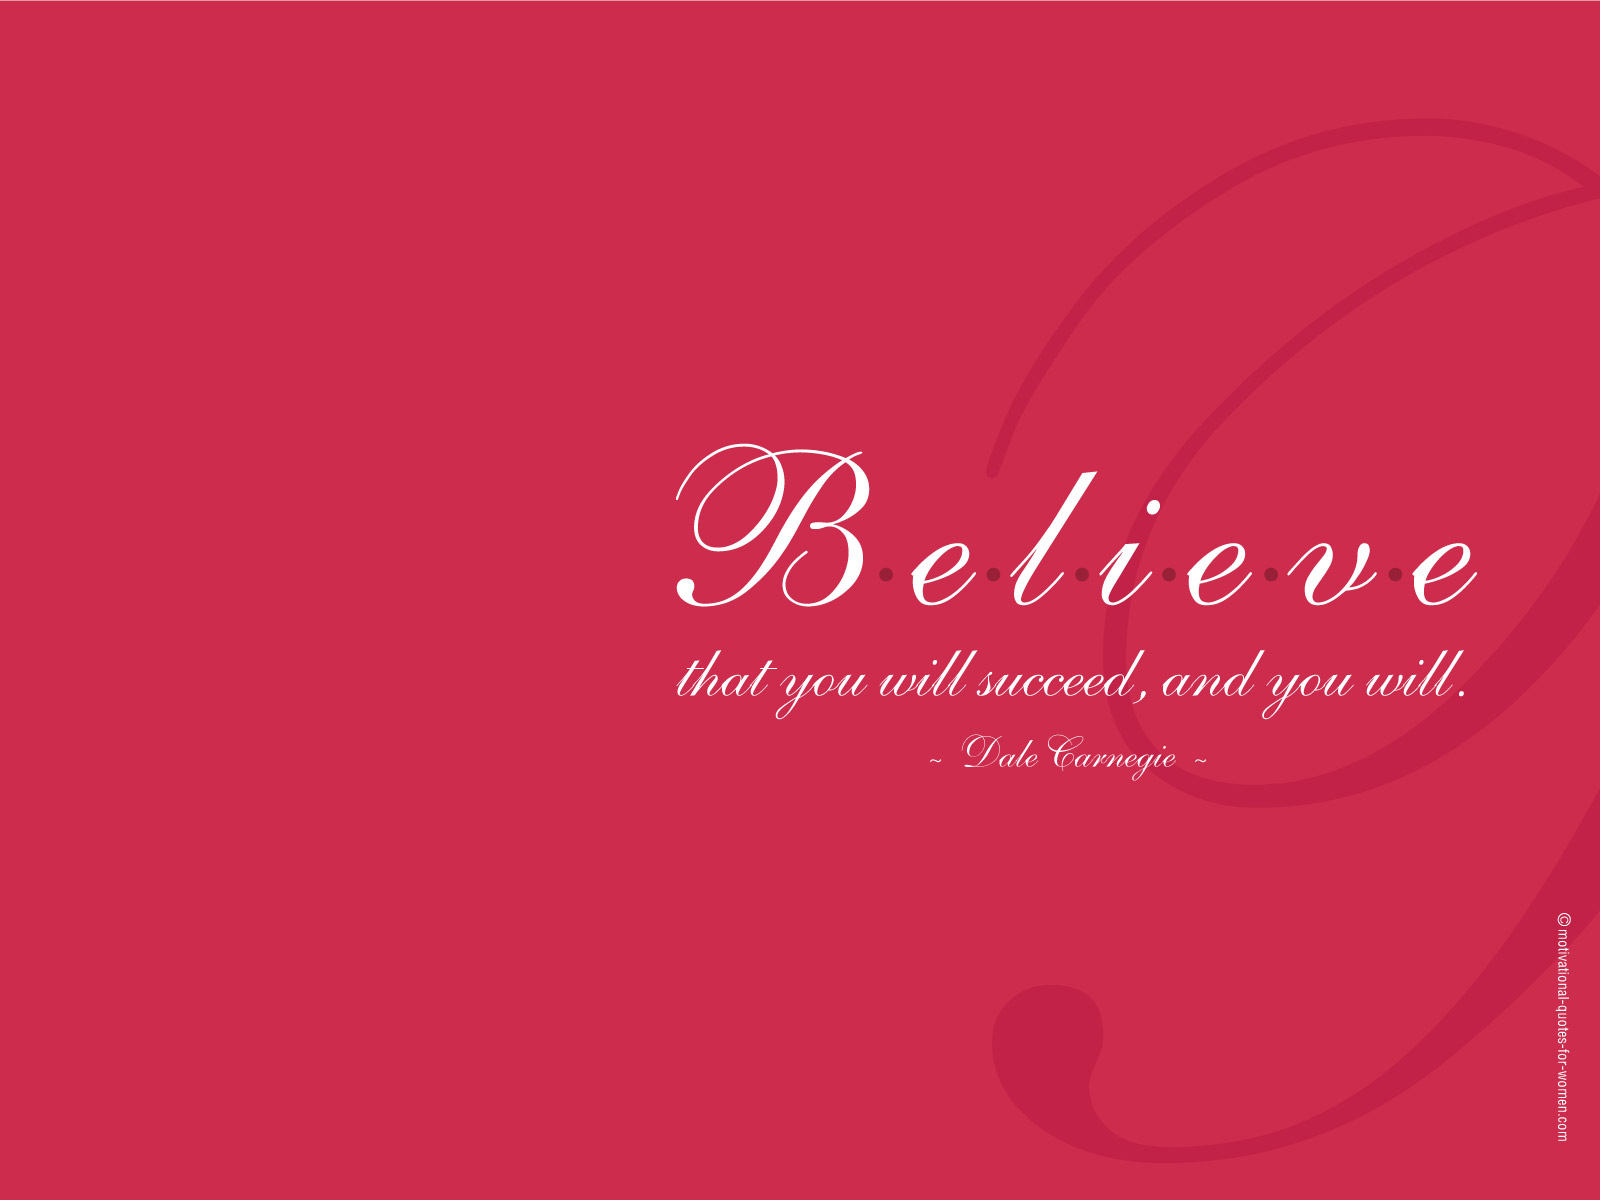 Inspirational Believe Quotes Wallpaper 3197 Inspiration   bwalles